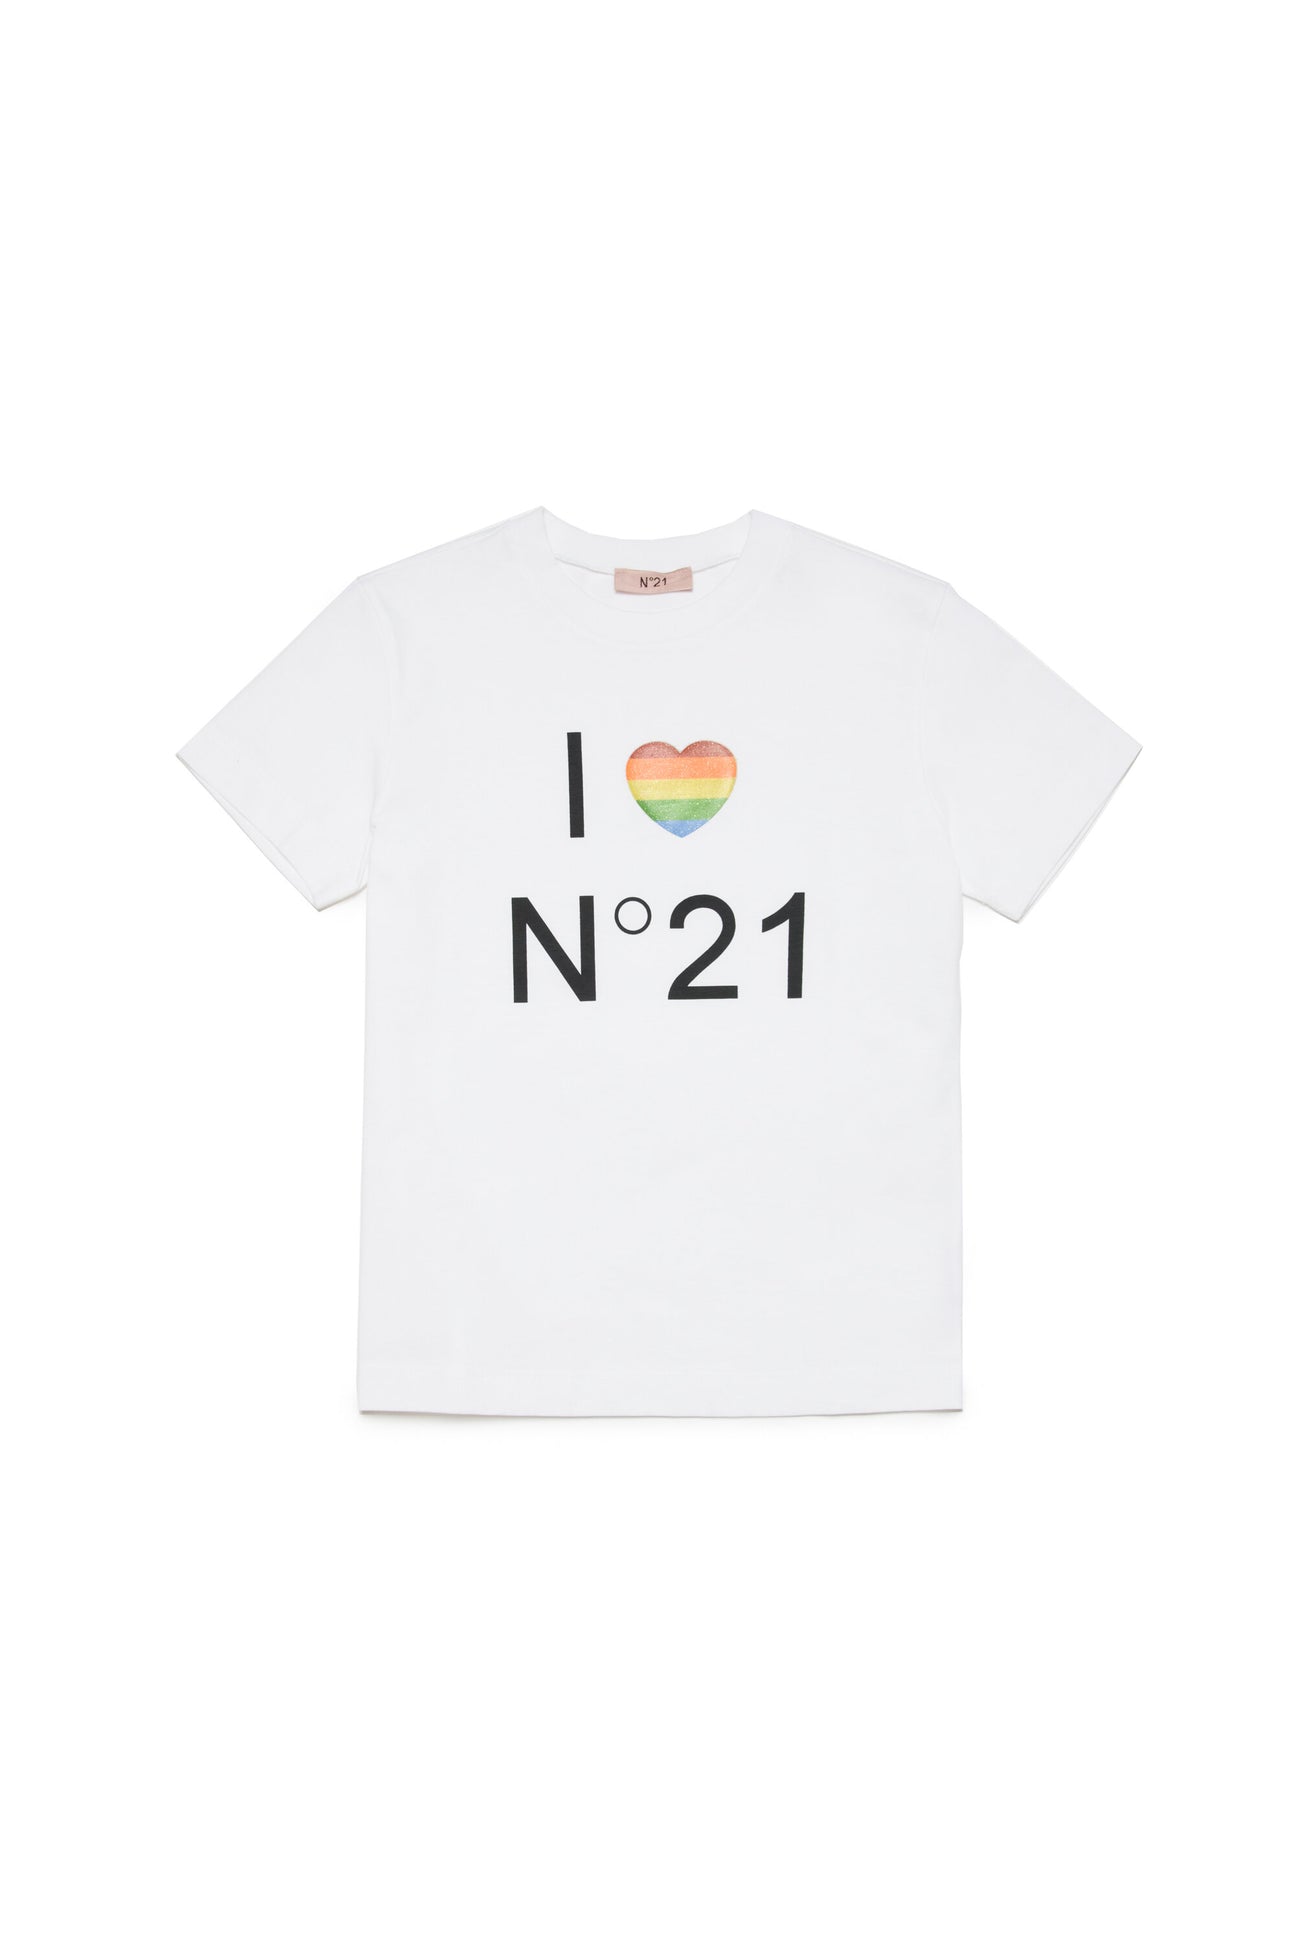 T-shirt branded with I Love N°21 logo 